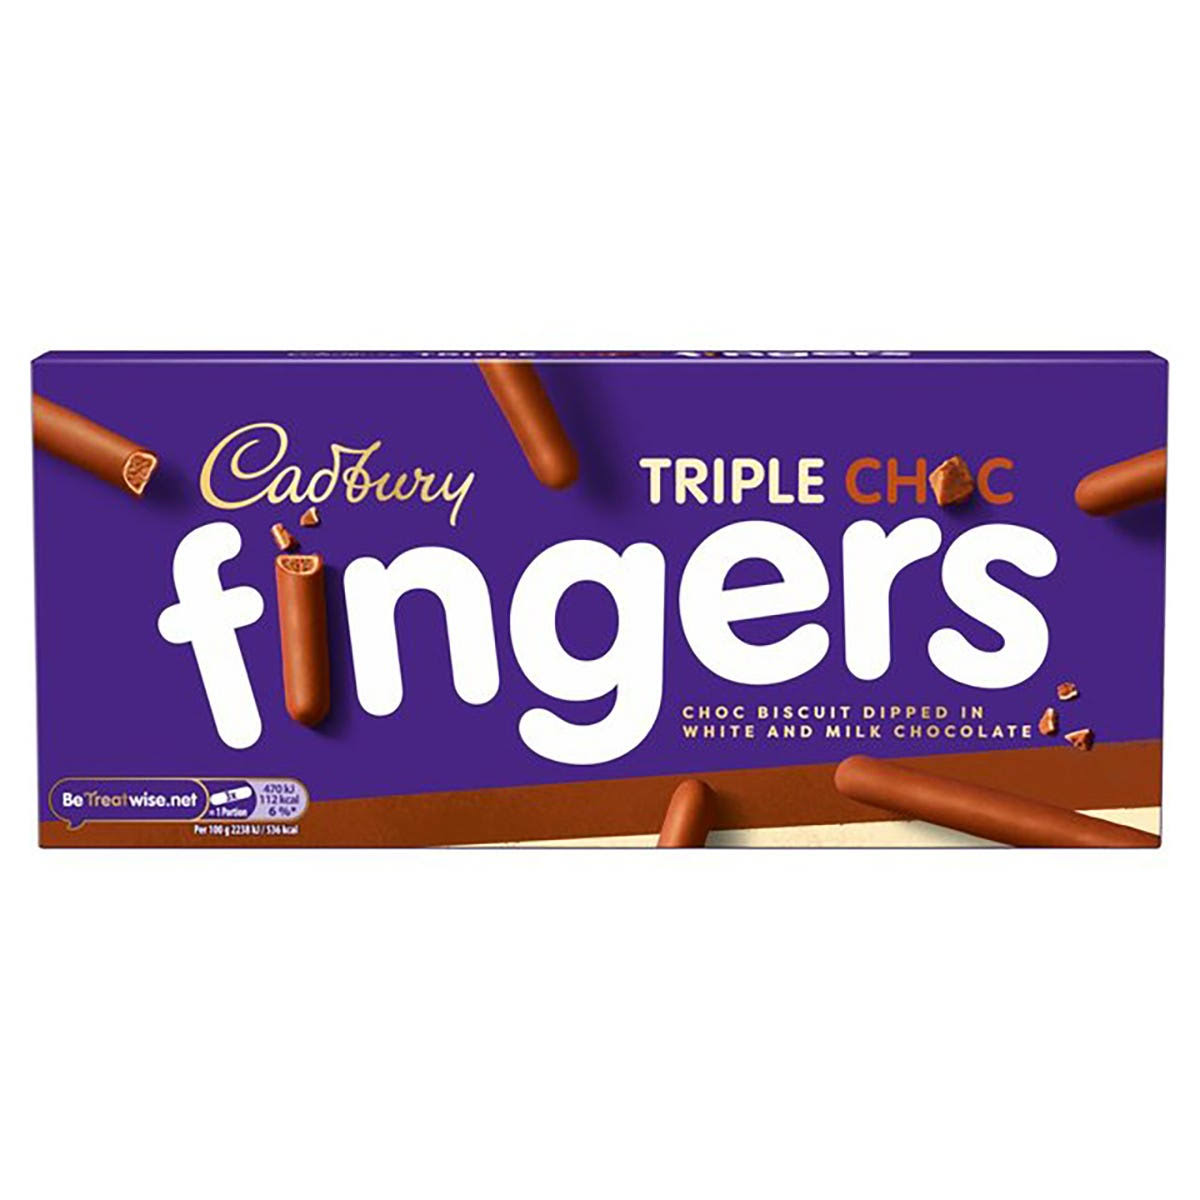 Cadbury Triple Choc Fingers Delivered to Canada